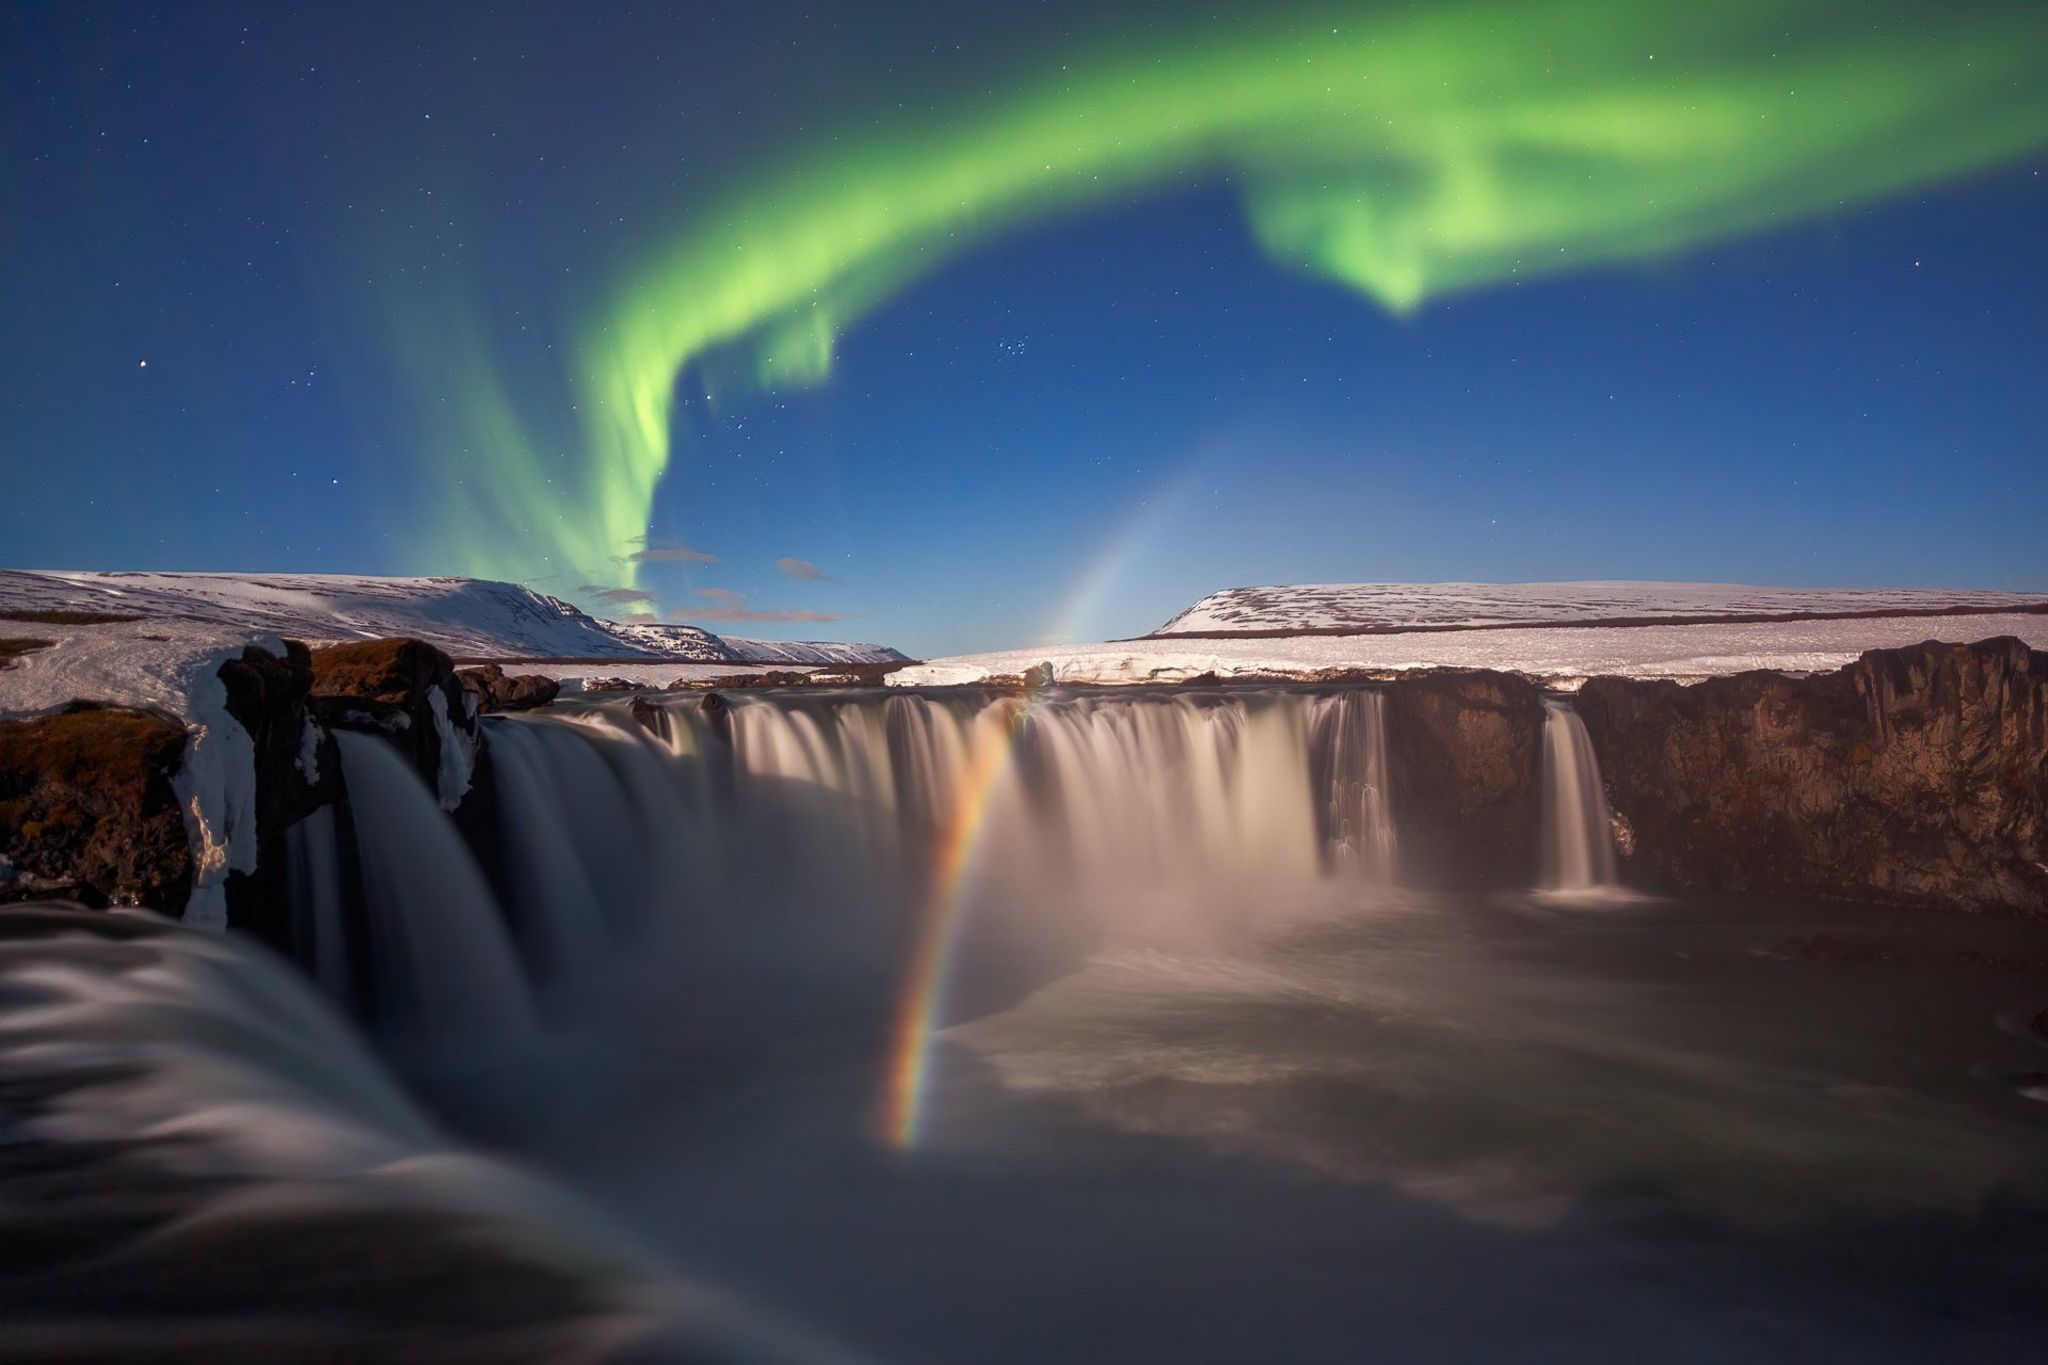 The Northen Lights and a lunar rainbow seen above the Godafoss waterfall in Iceland.